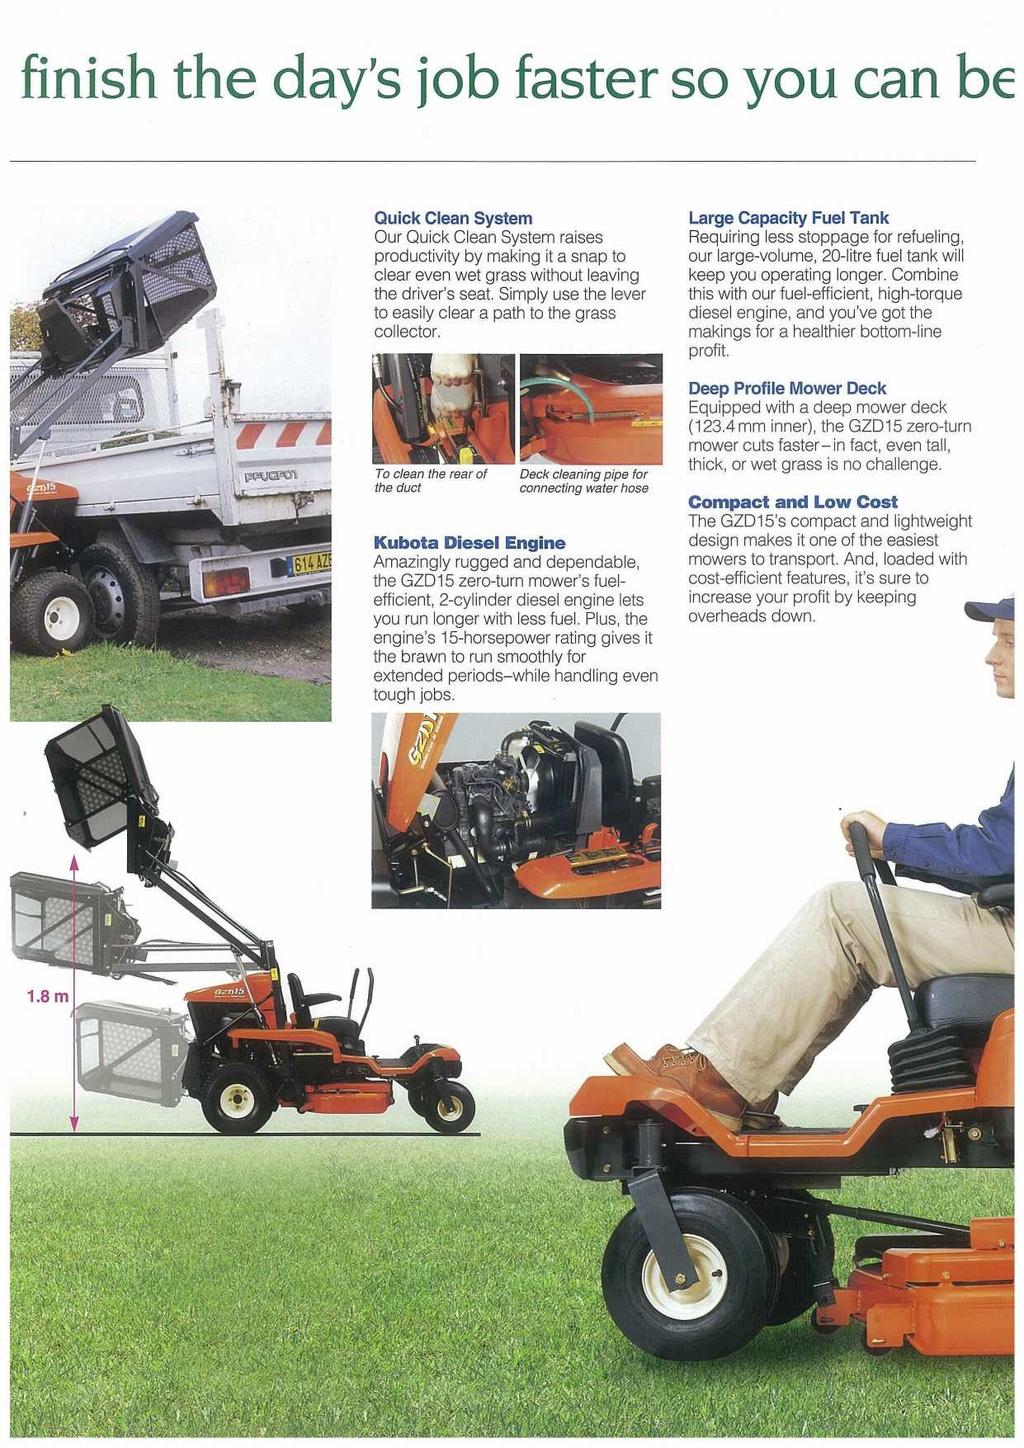 finish the day's job faster so you can be Quick Clean System Our Quick Clean System raises productivity by making it a snap to clear even wet grass without leaving the driver's seat.